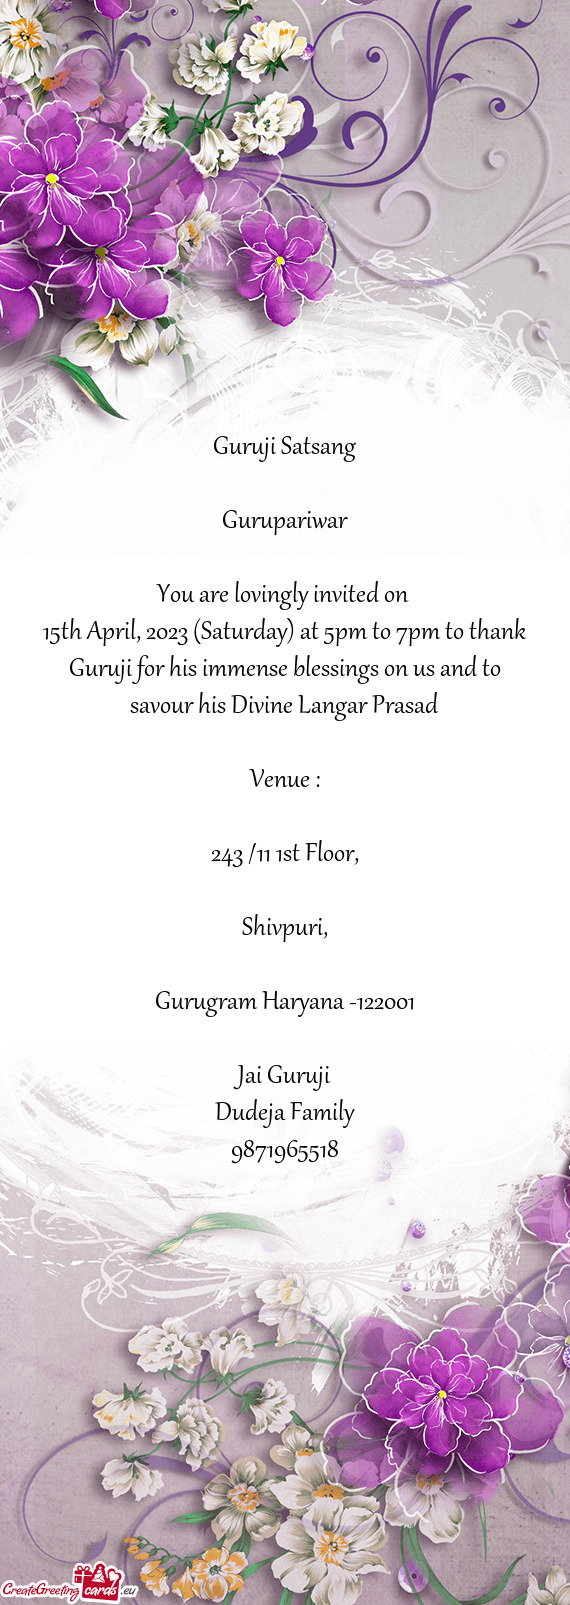 15th April, 2023 (Saturday) at 5pm to 7pm to thank Guruji for his immense blessings on us and to sav